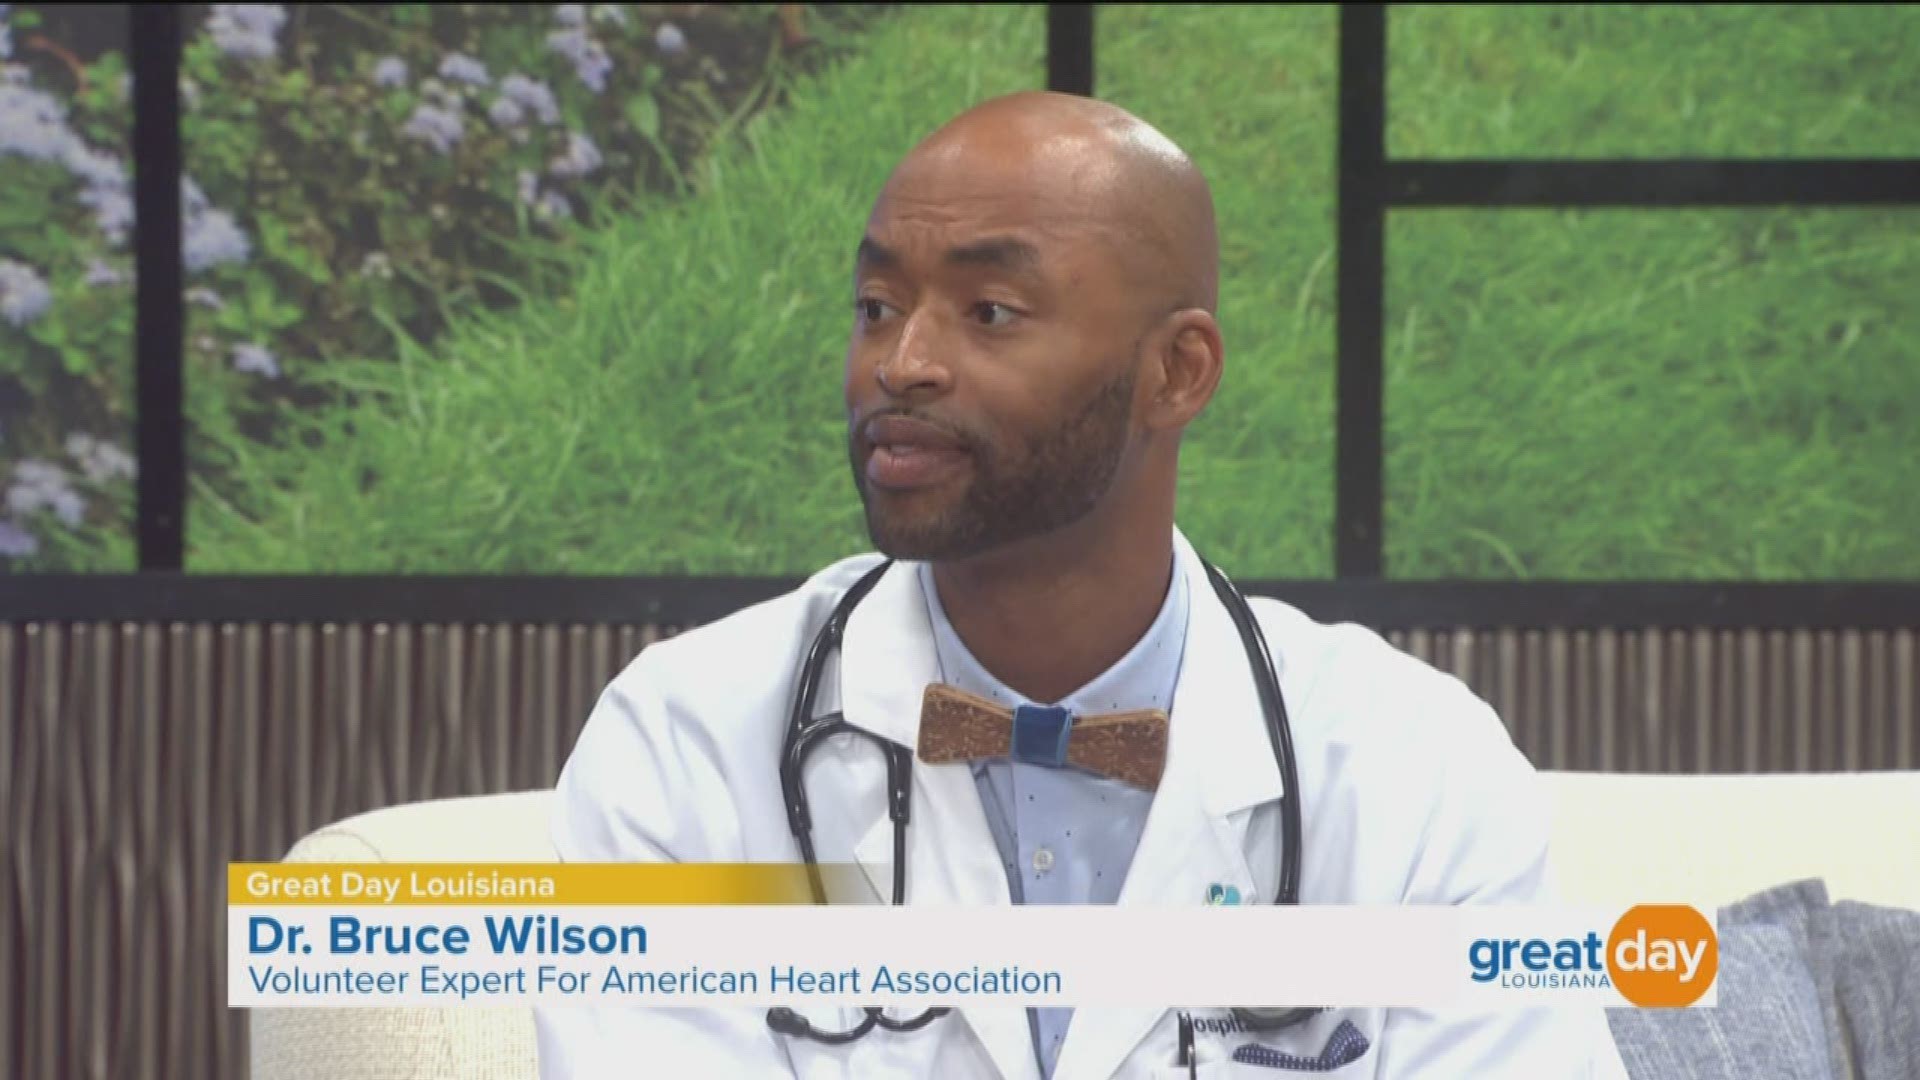 It's National Relaxation Day and the American Heart Association is trying to spread the word about how important it is to take time to relax to relieve stress. Dr. Bruce Wilson joins us with tips on how to reduce stress and improve your heart health.